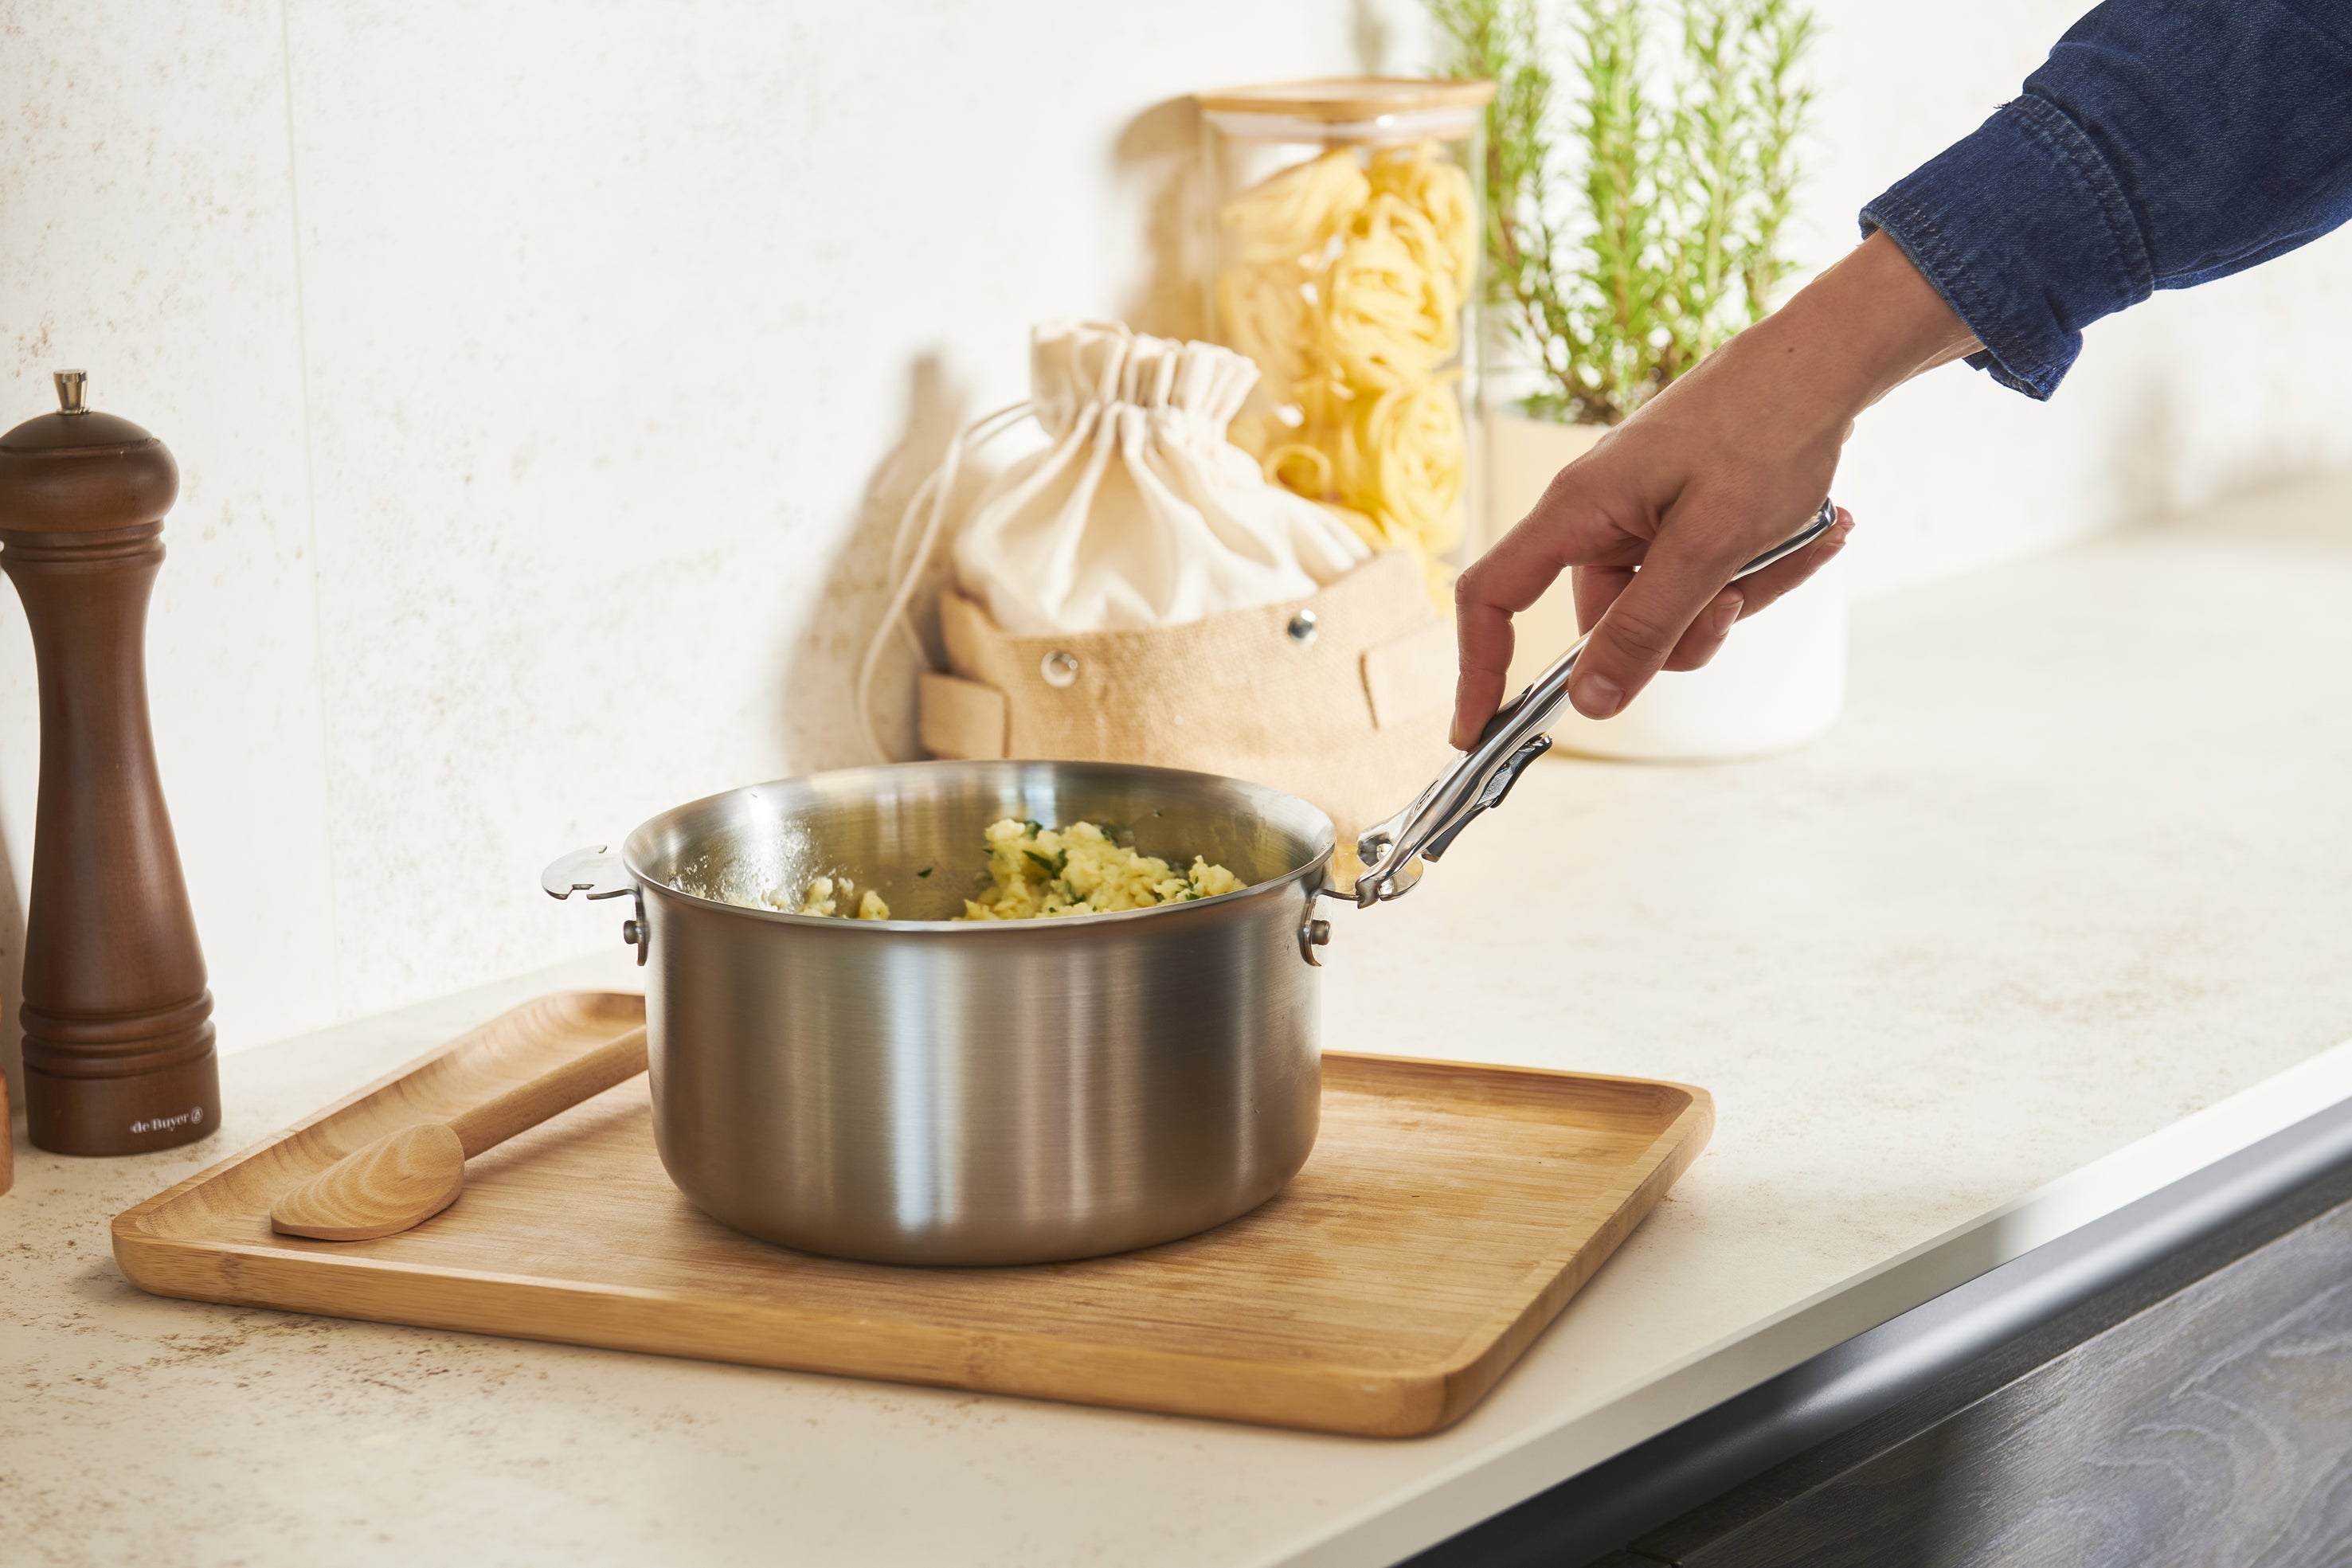 ALCHIMY Stainless Steel Saucepan - LOQY System